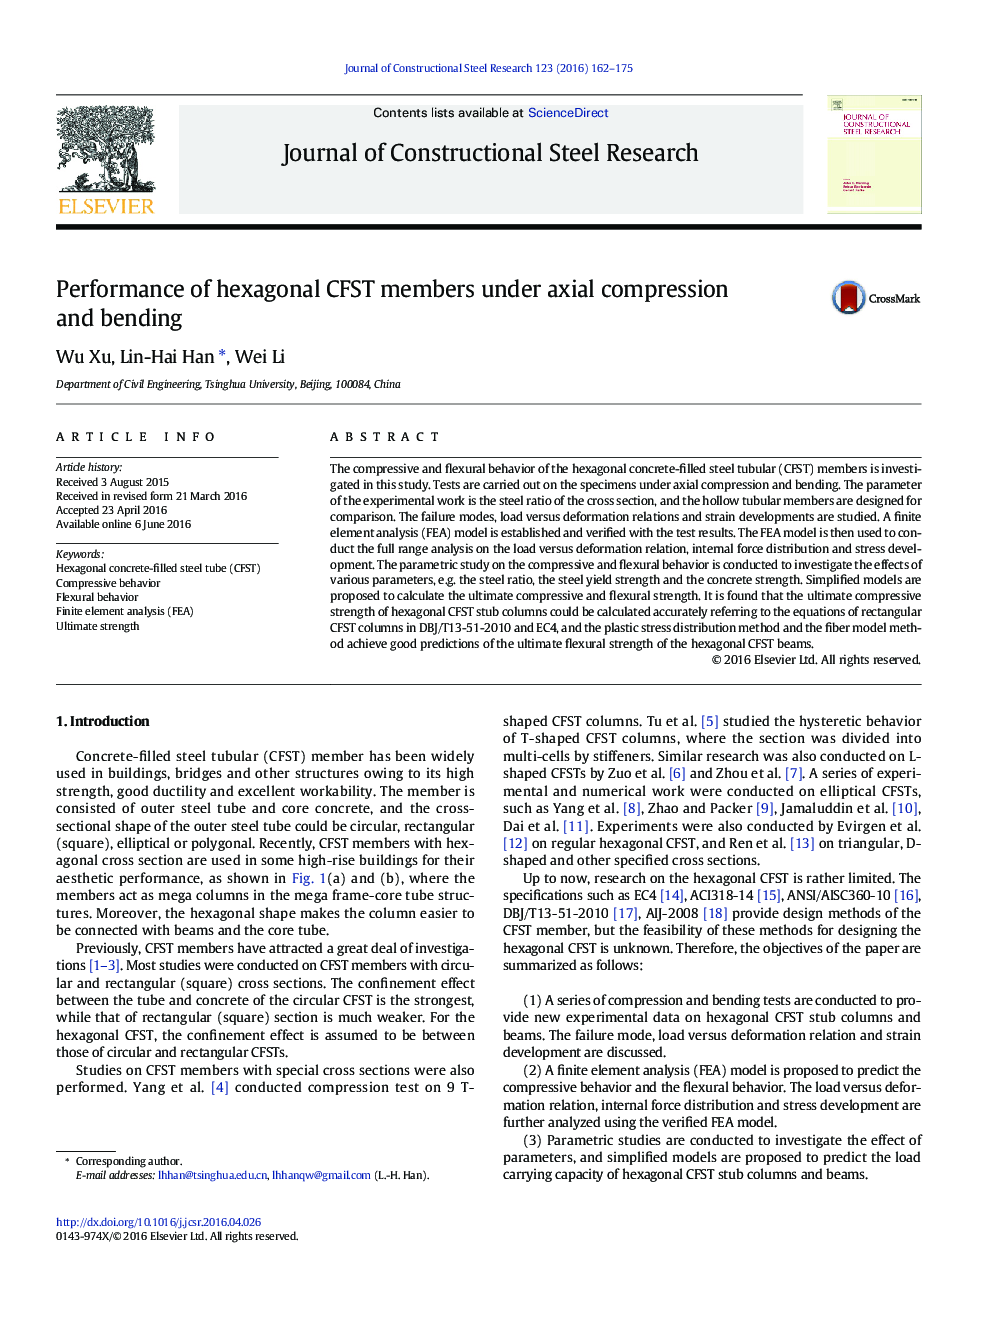 Performance of hexagonal CFST members under axial compression and bending